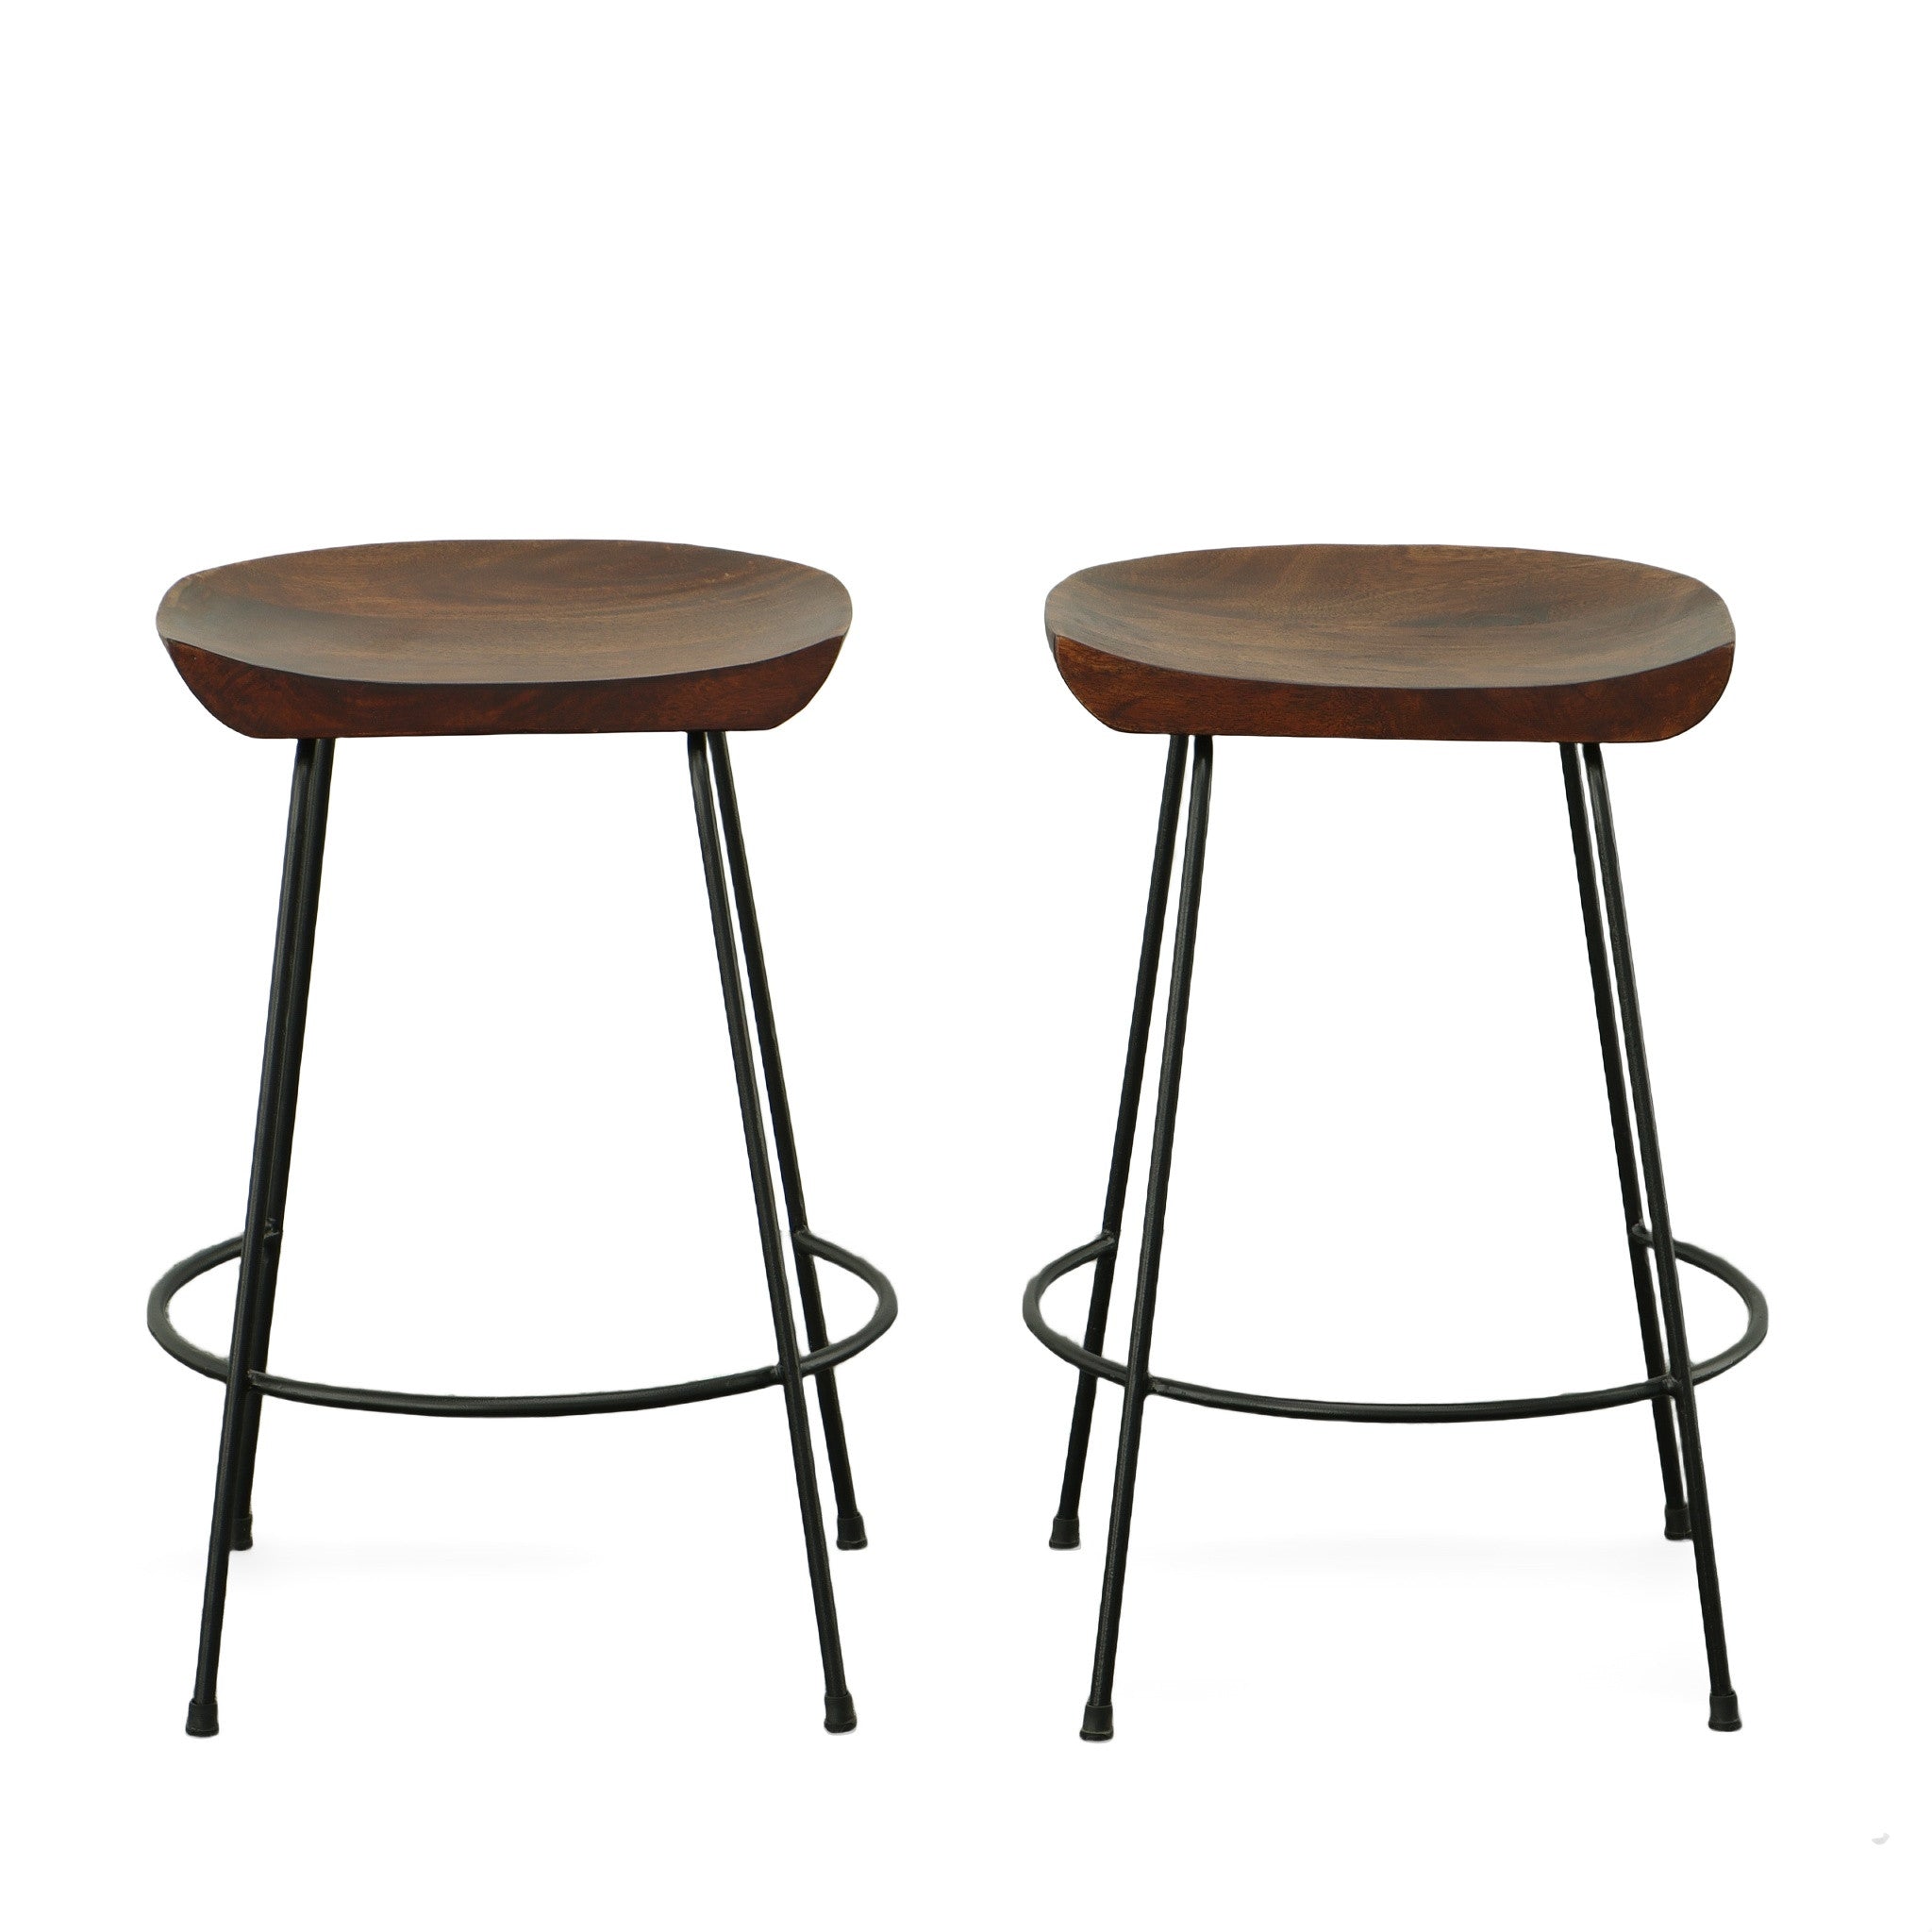 Set of Two 25" Chestnut And Black Steel Backless Counter Height Bar Chairs